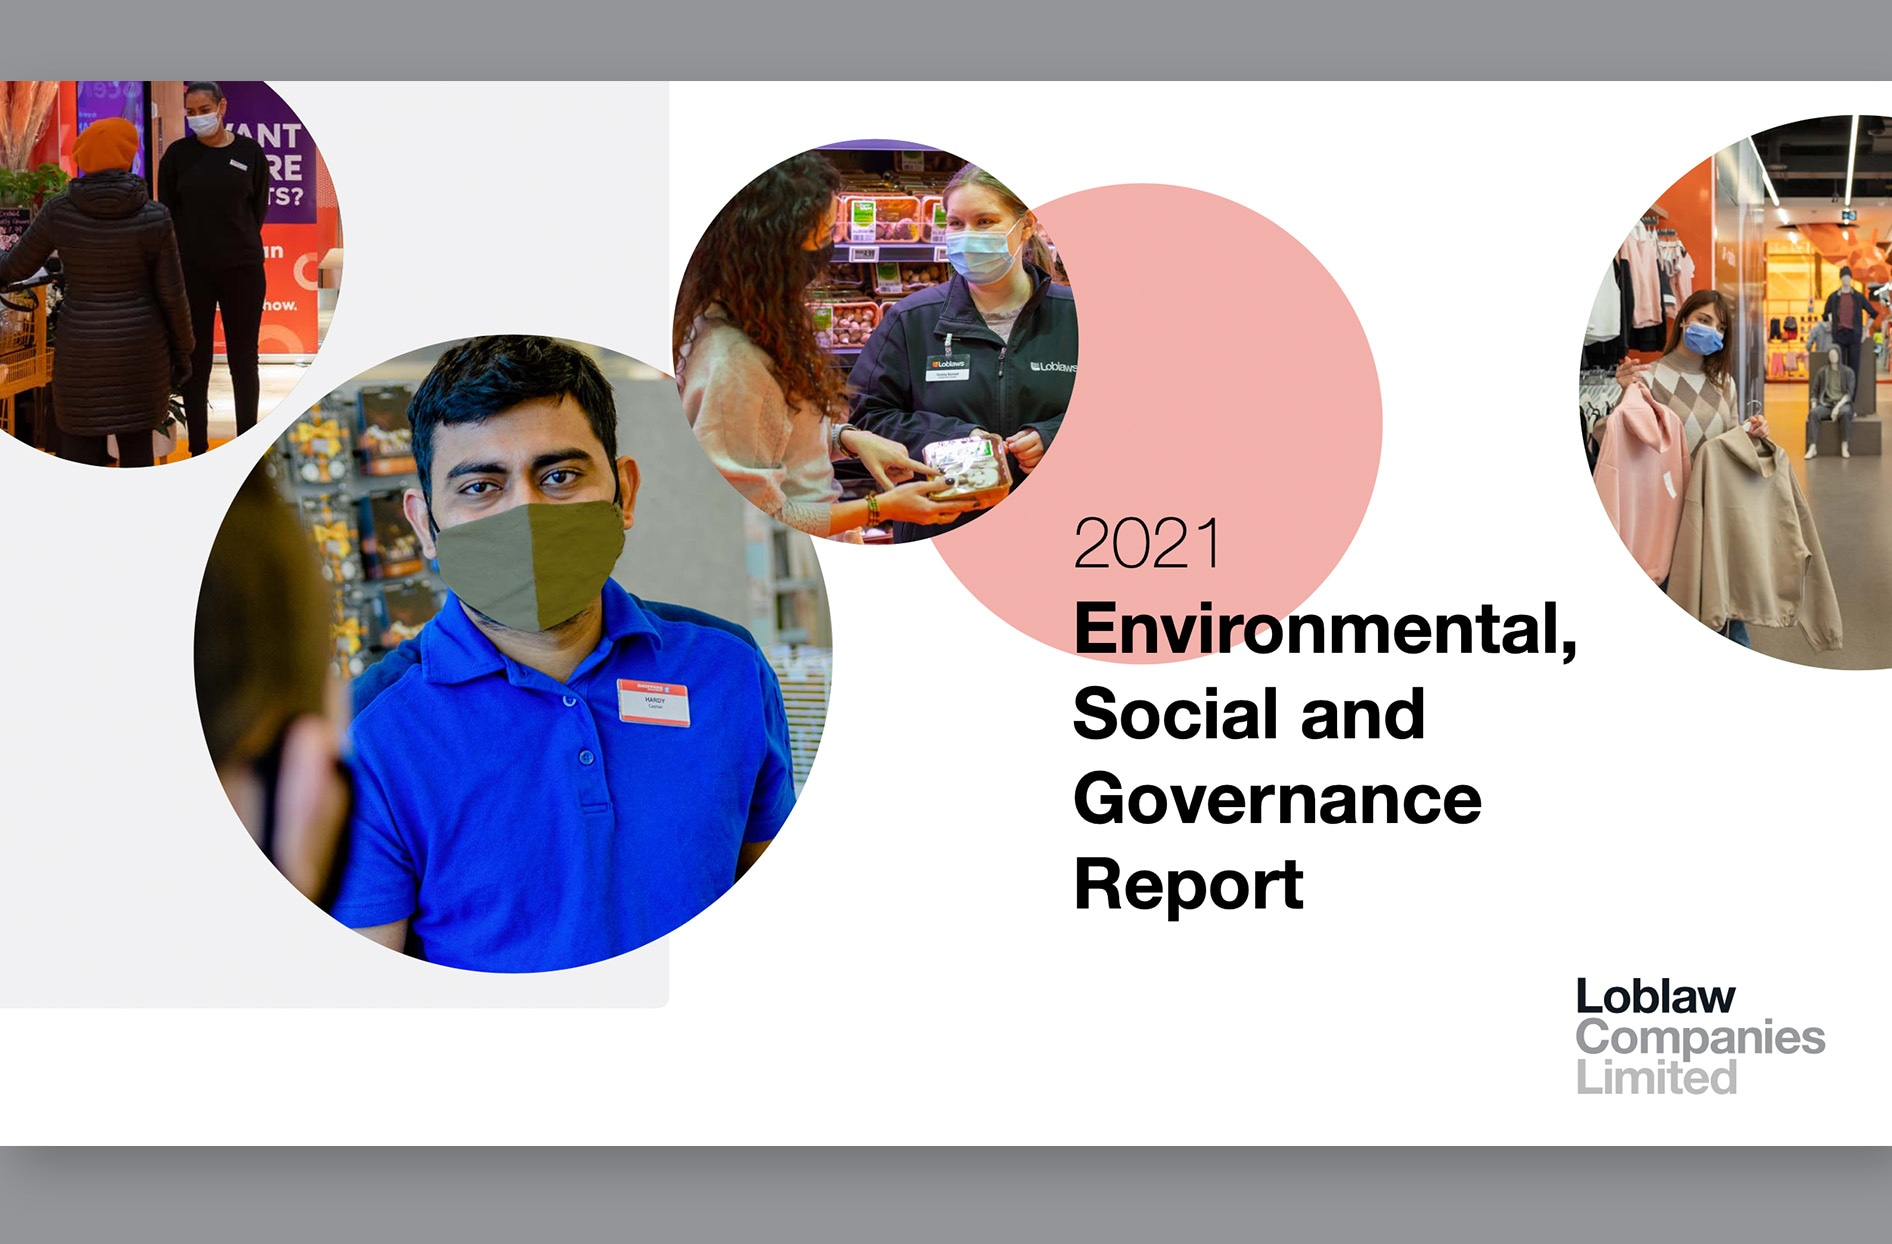 The cover of the ESG report, which is a collection of images of different colleagues in stores.